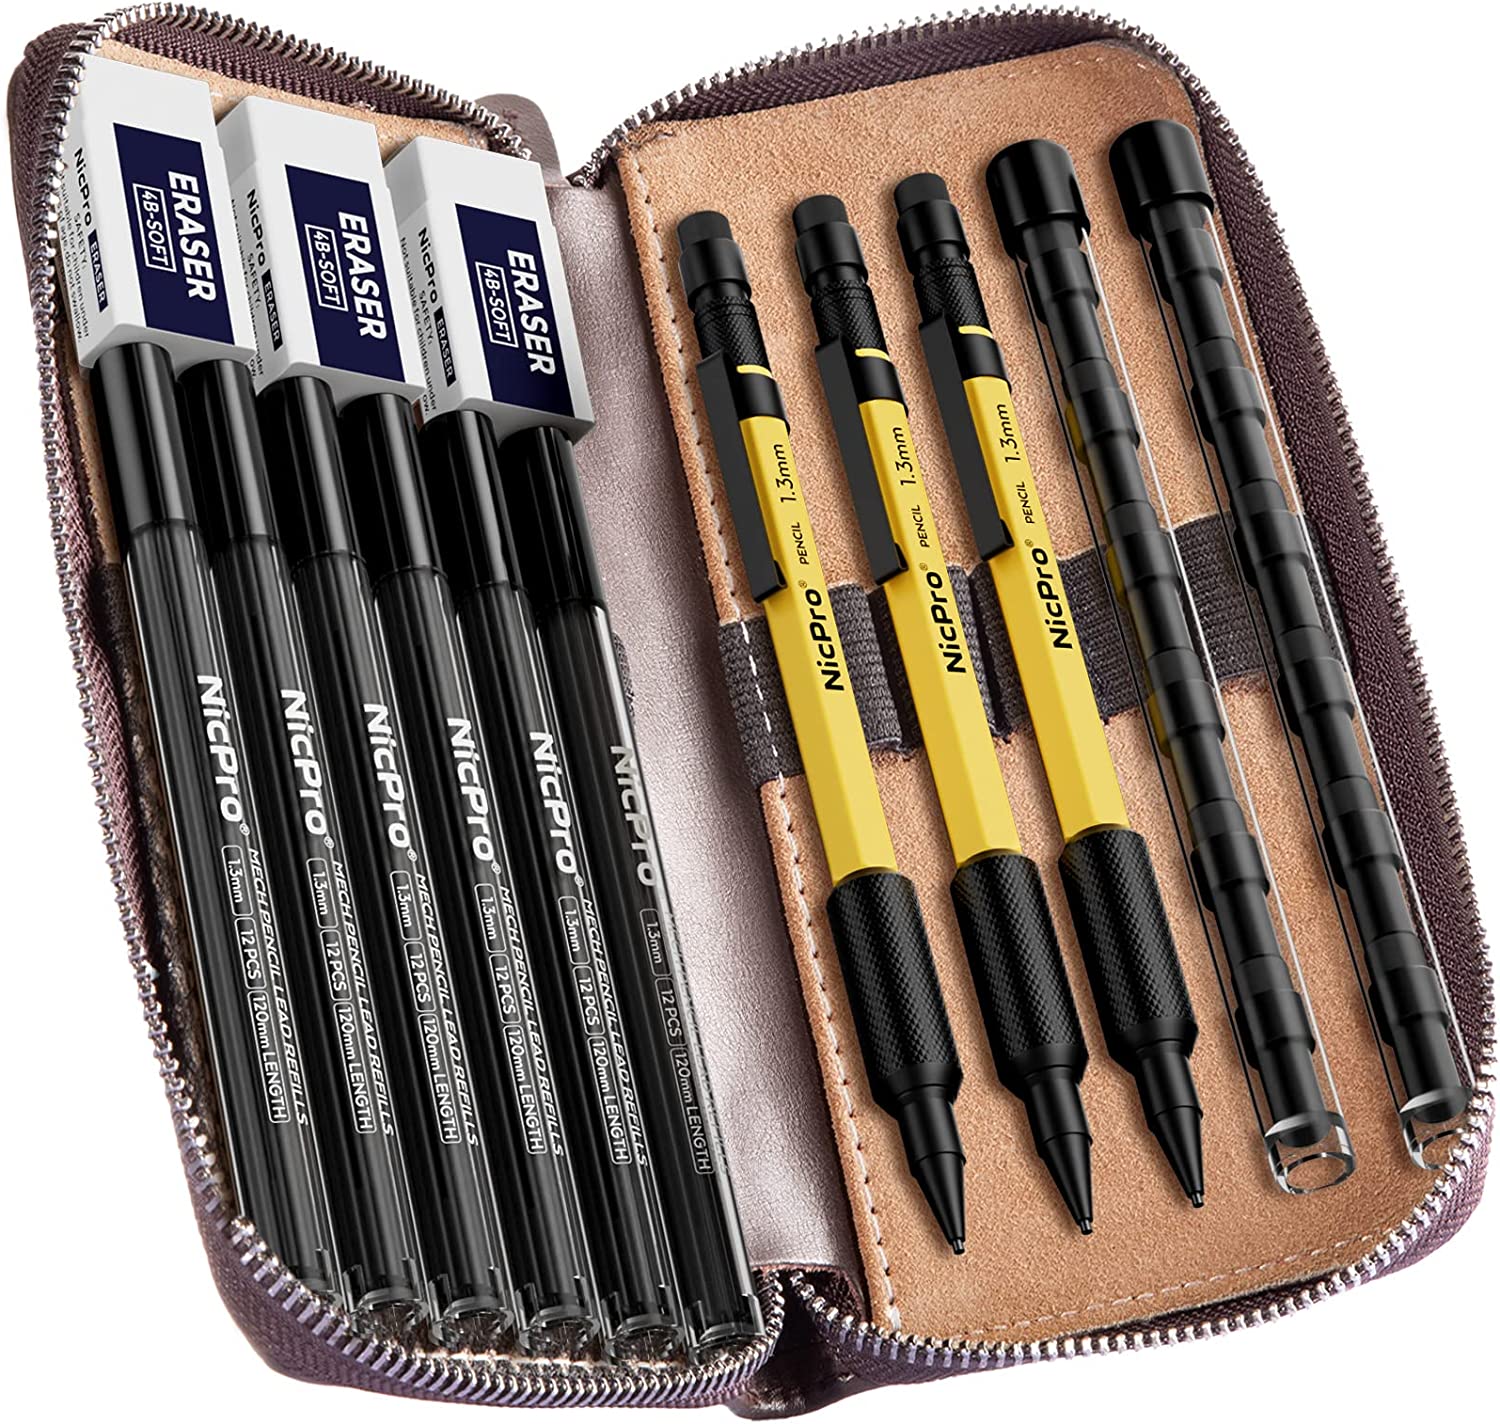 Nicpro 3PCS 1.3 mm Mechanical Pencils Set in Leather Case, with 72 Lea